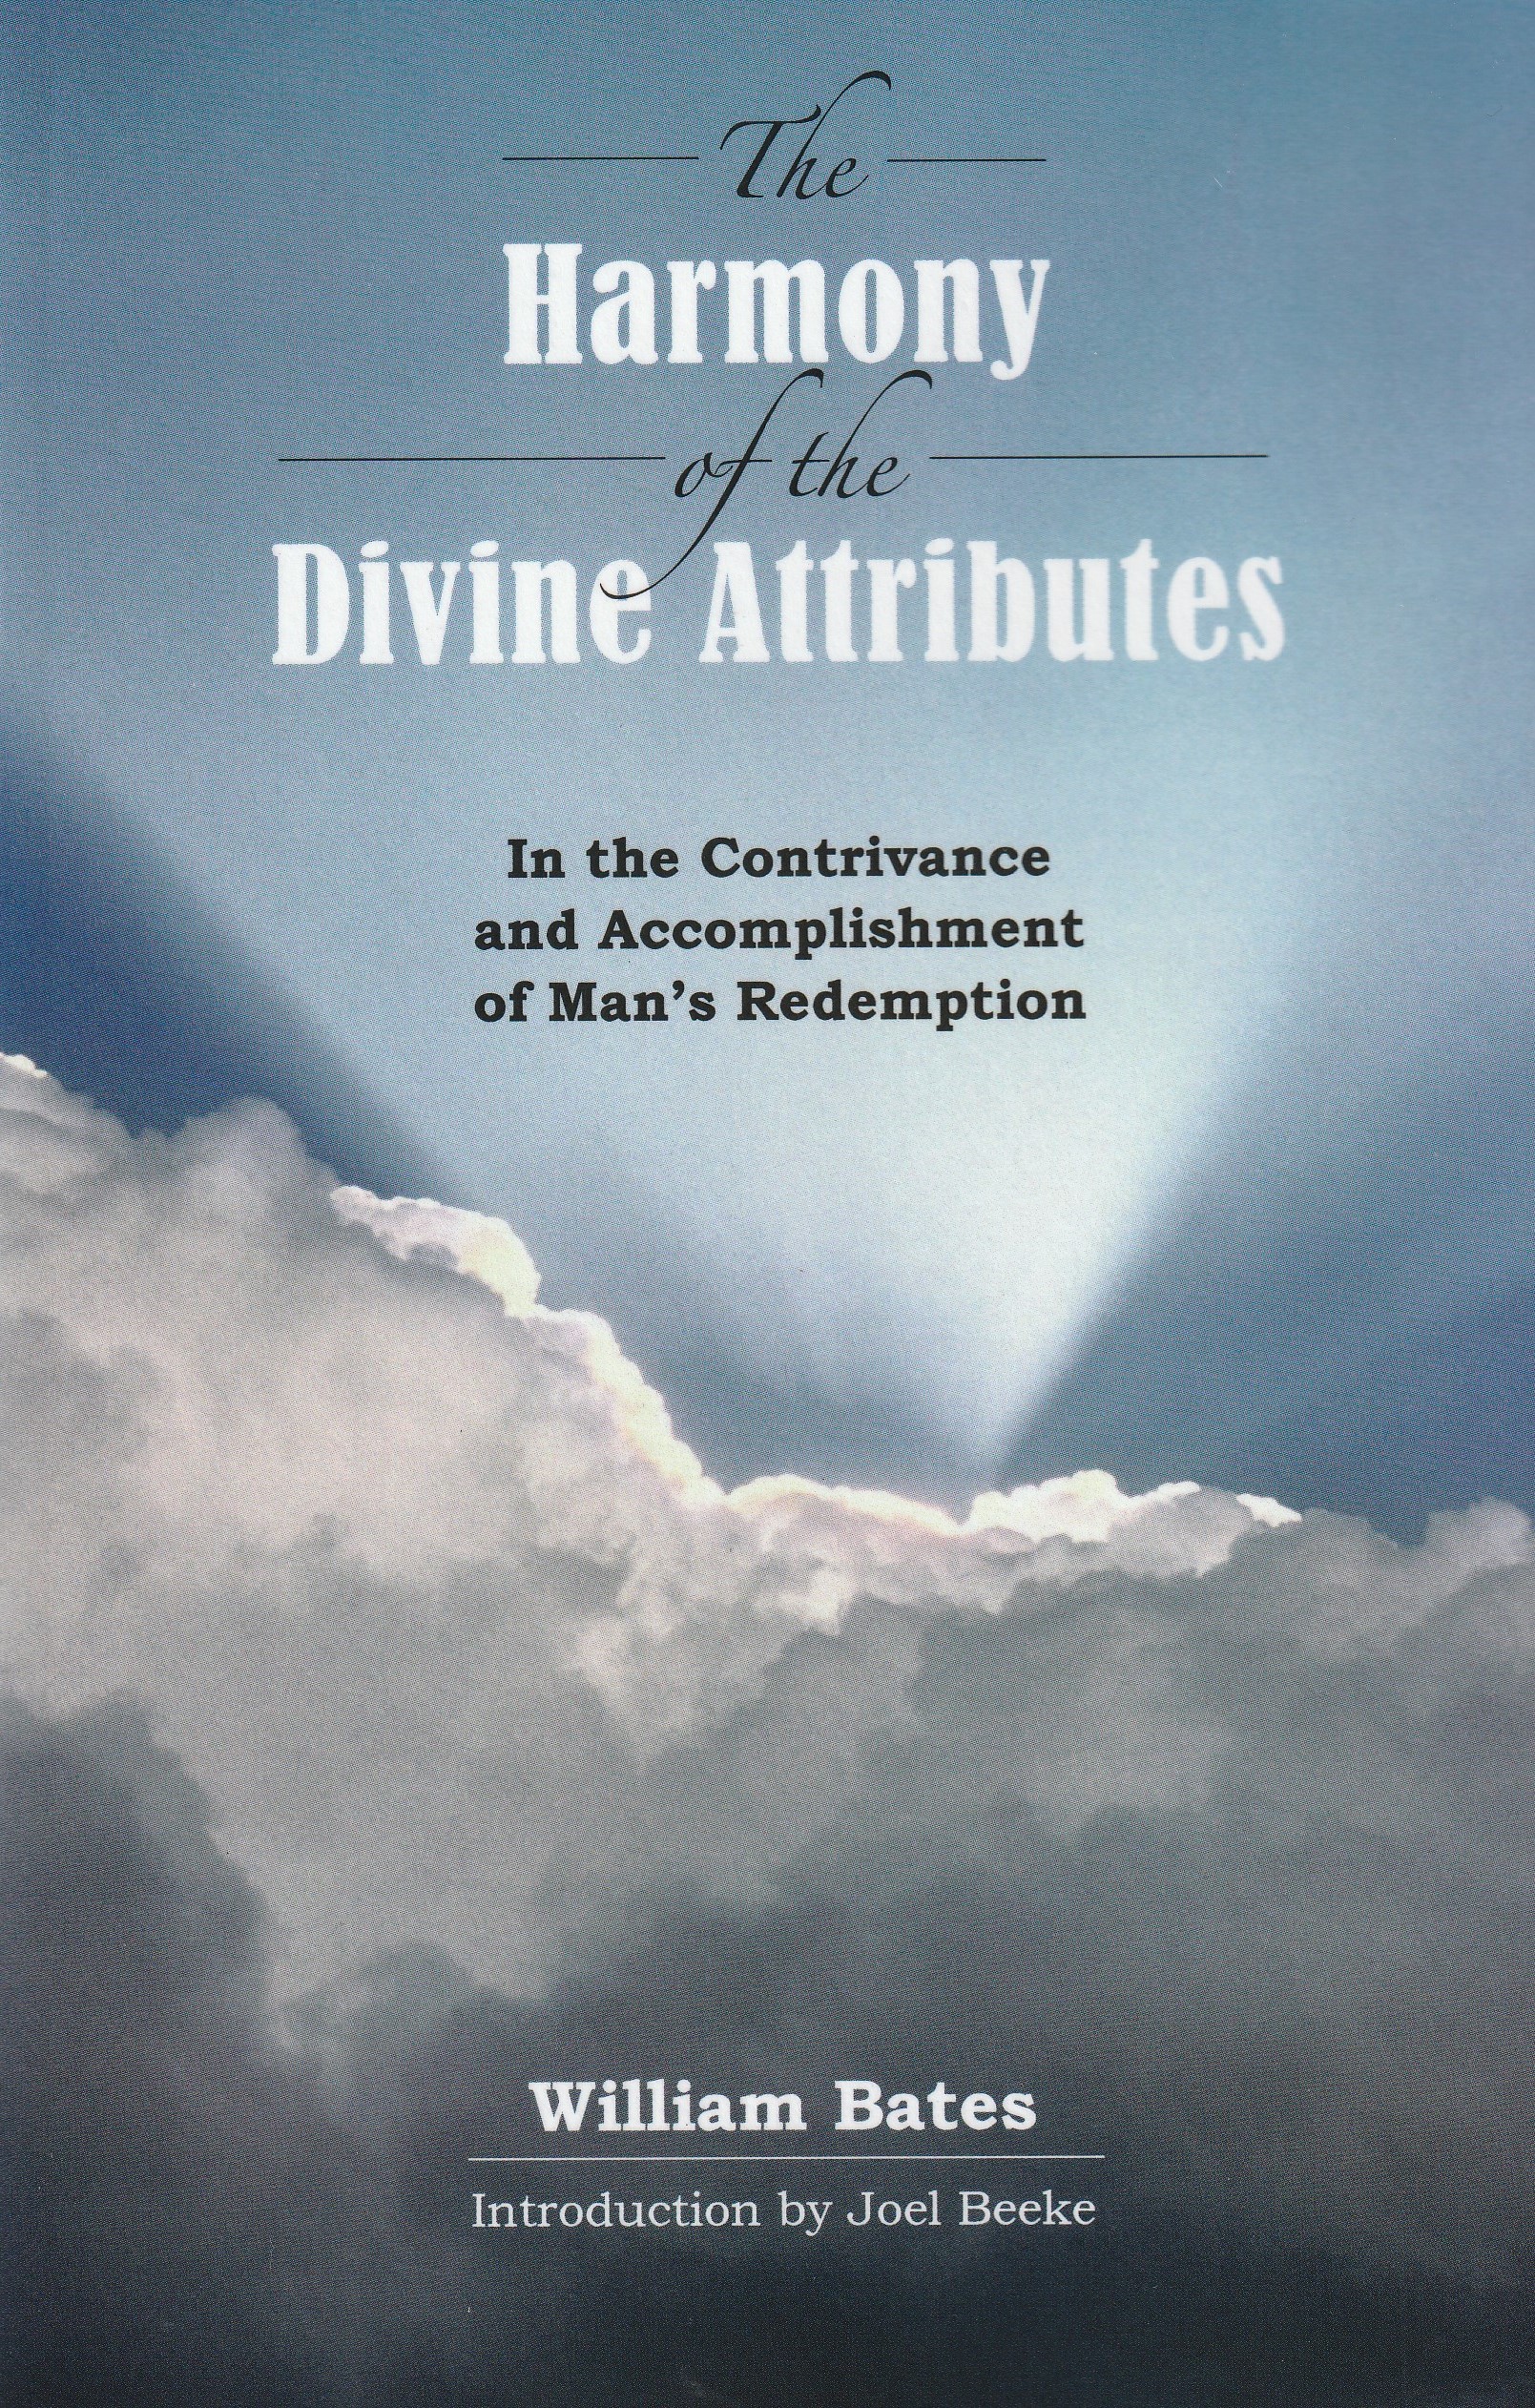 The Harmony of the Divine Attributes